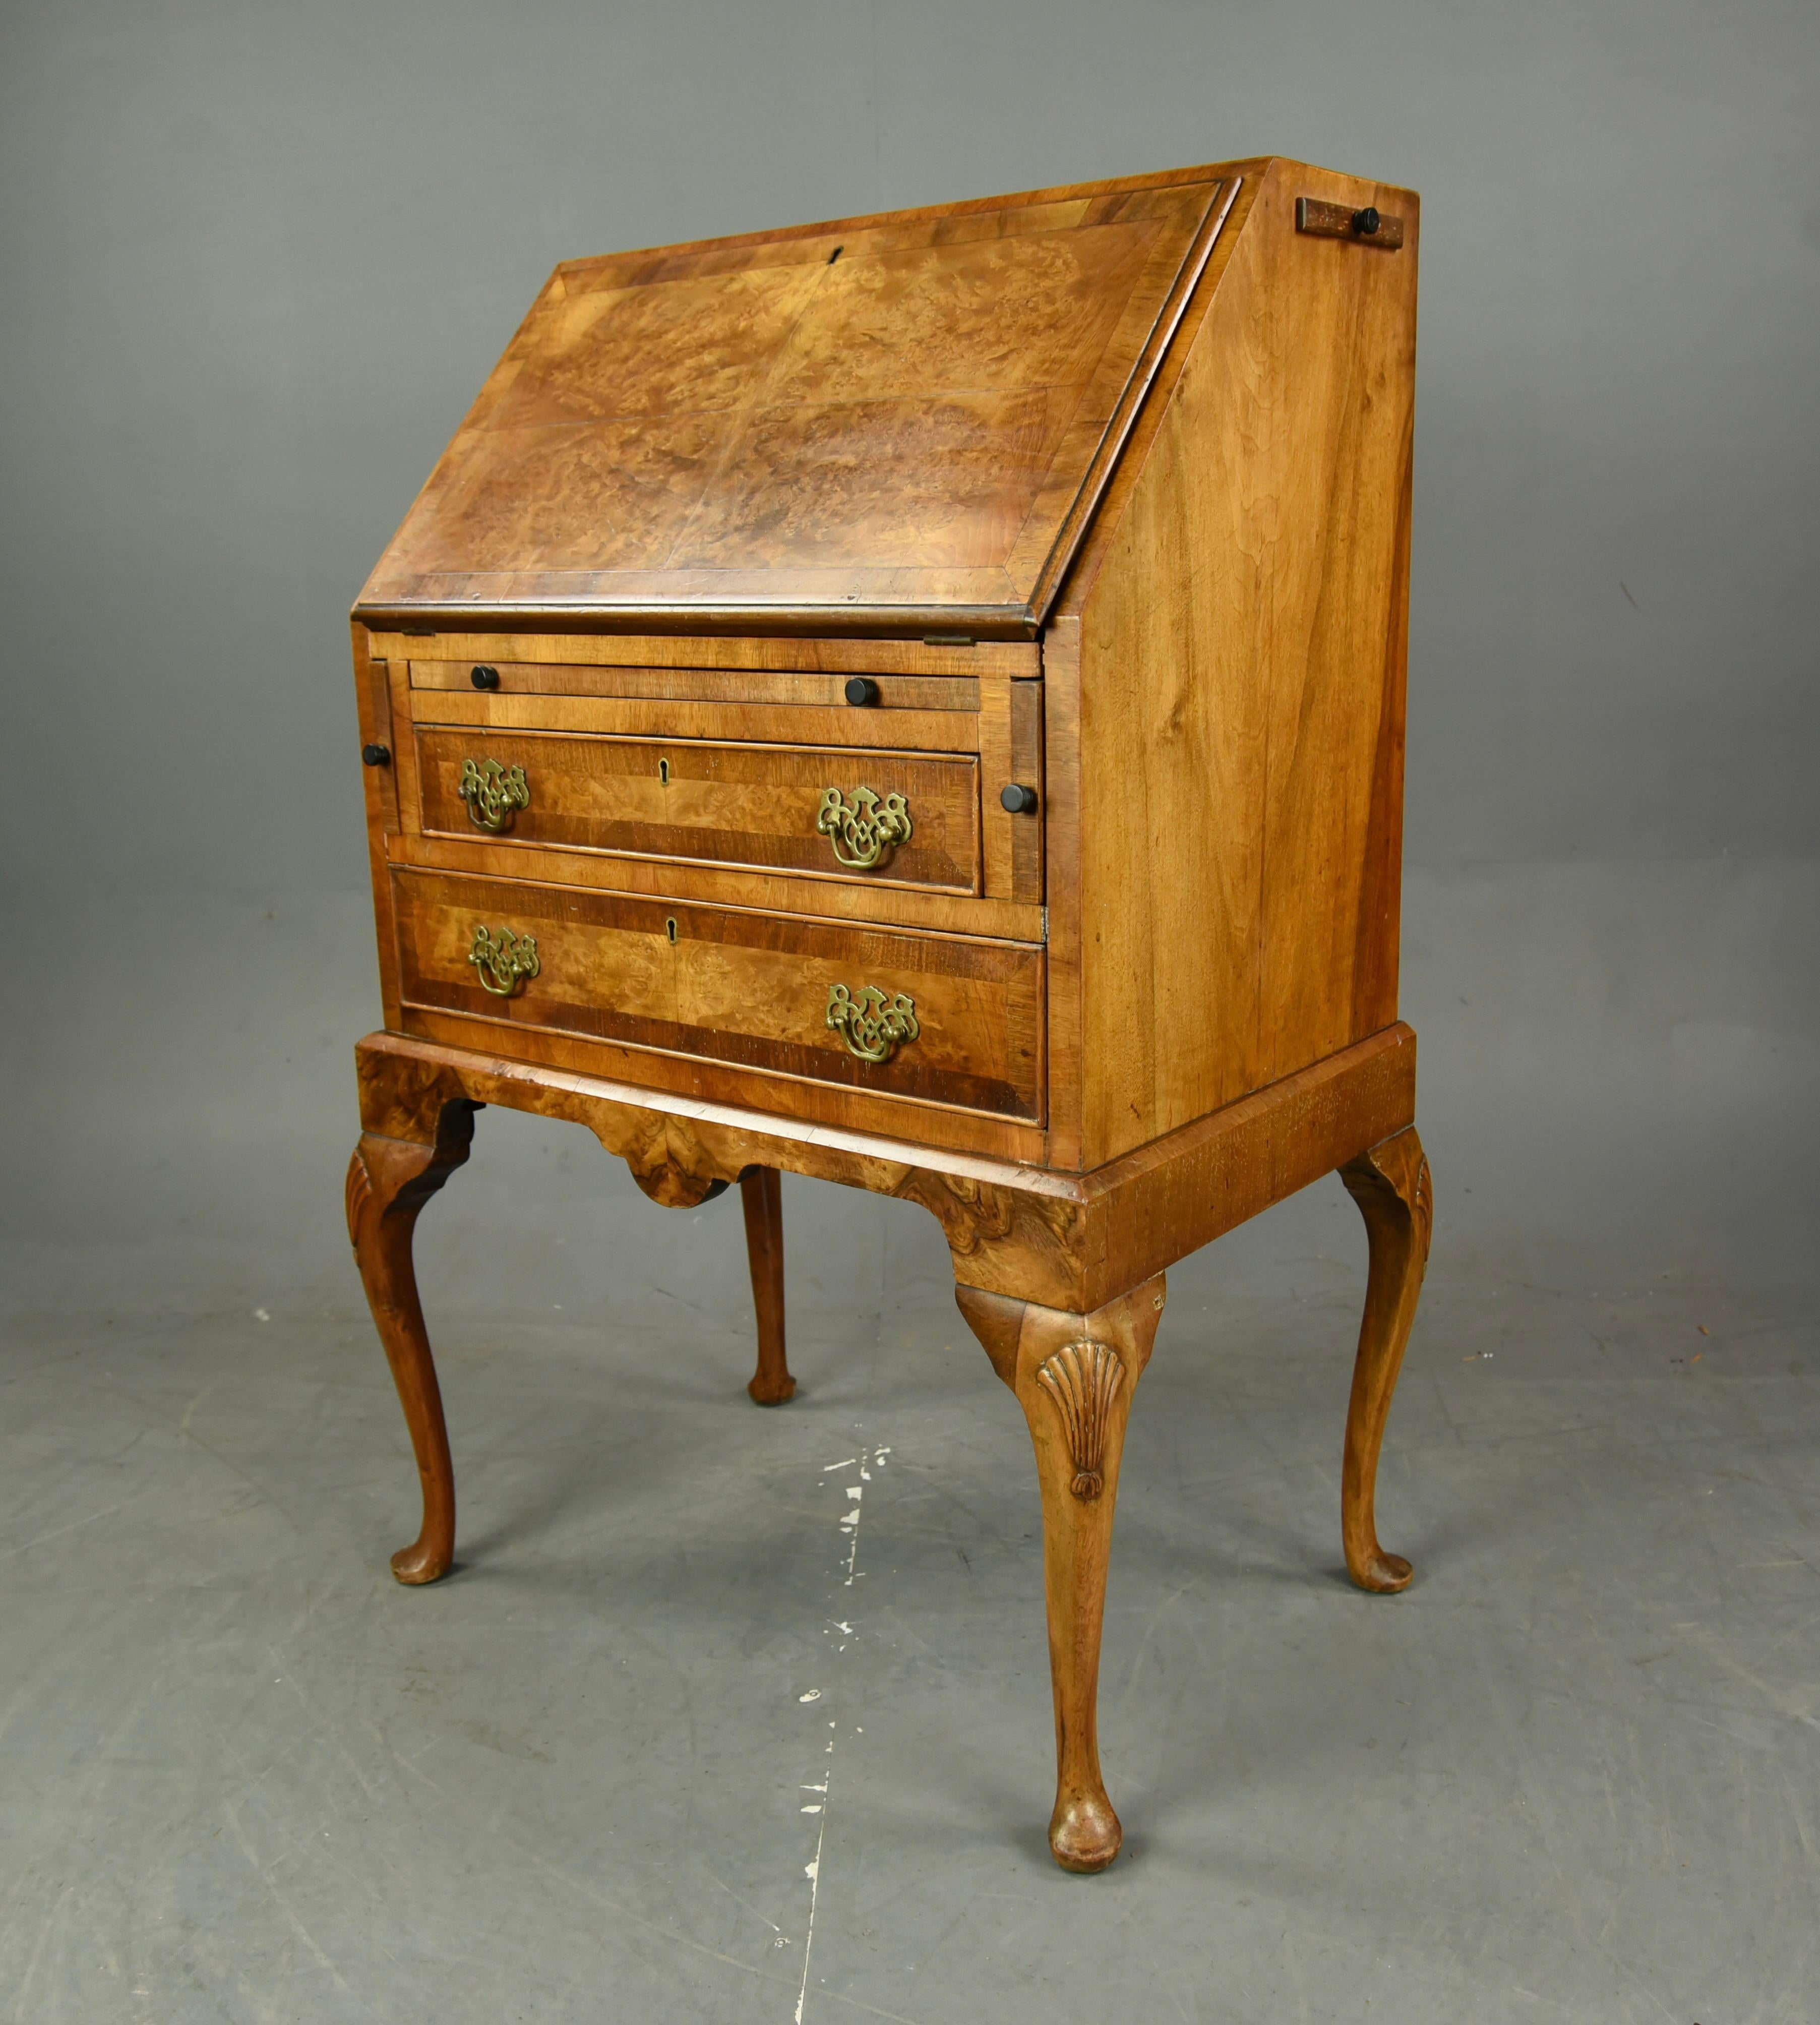 Wonderful small burr walnut Queen Anne style bureau circa 1920.
The bureau is very unusual having a brushing slide and two candle slides.
it is a great colour with a good grain and a nicely fitted interior, standing on elegant carved cabriole legs